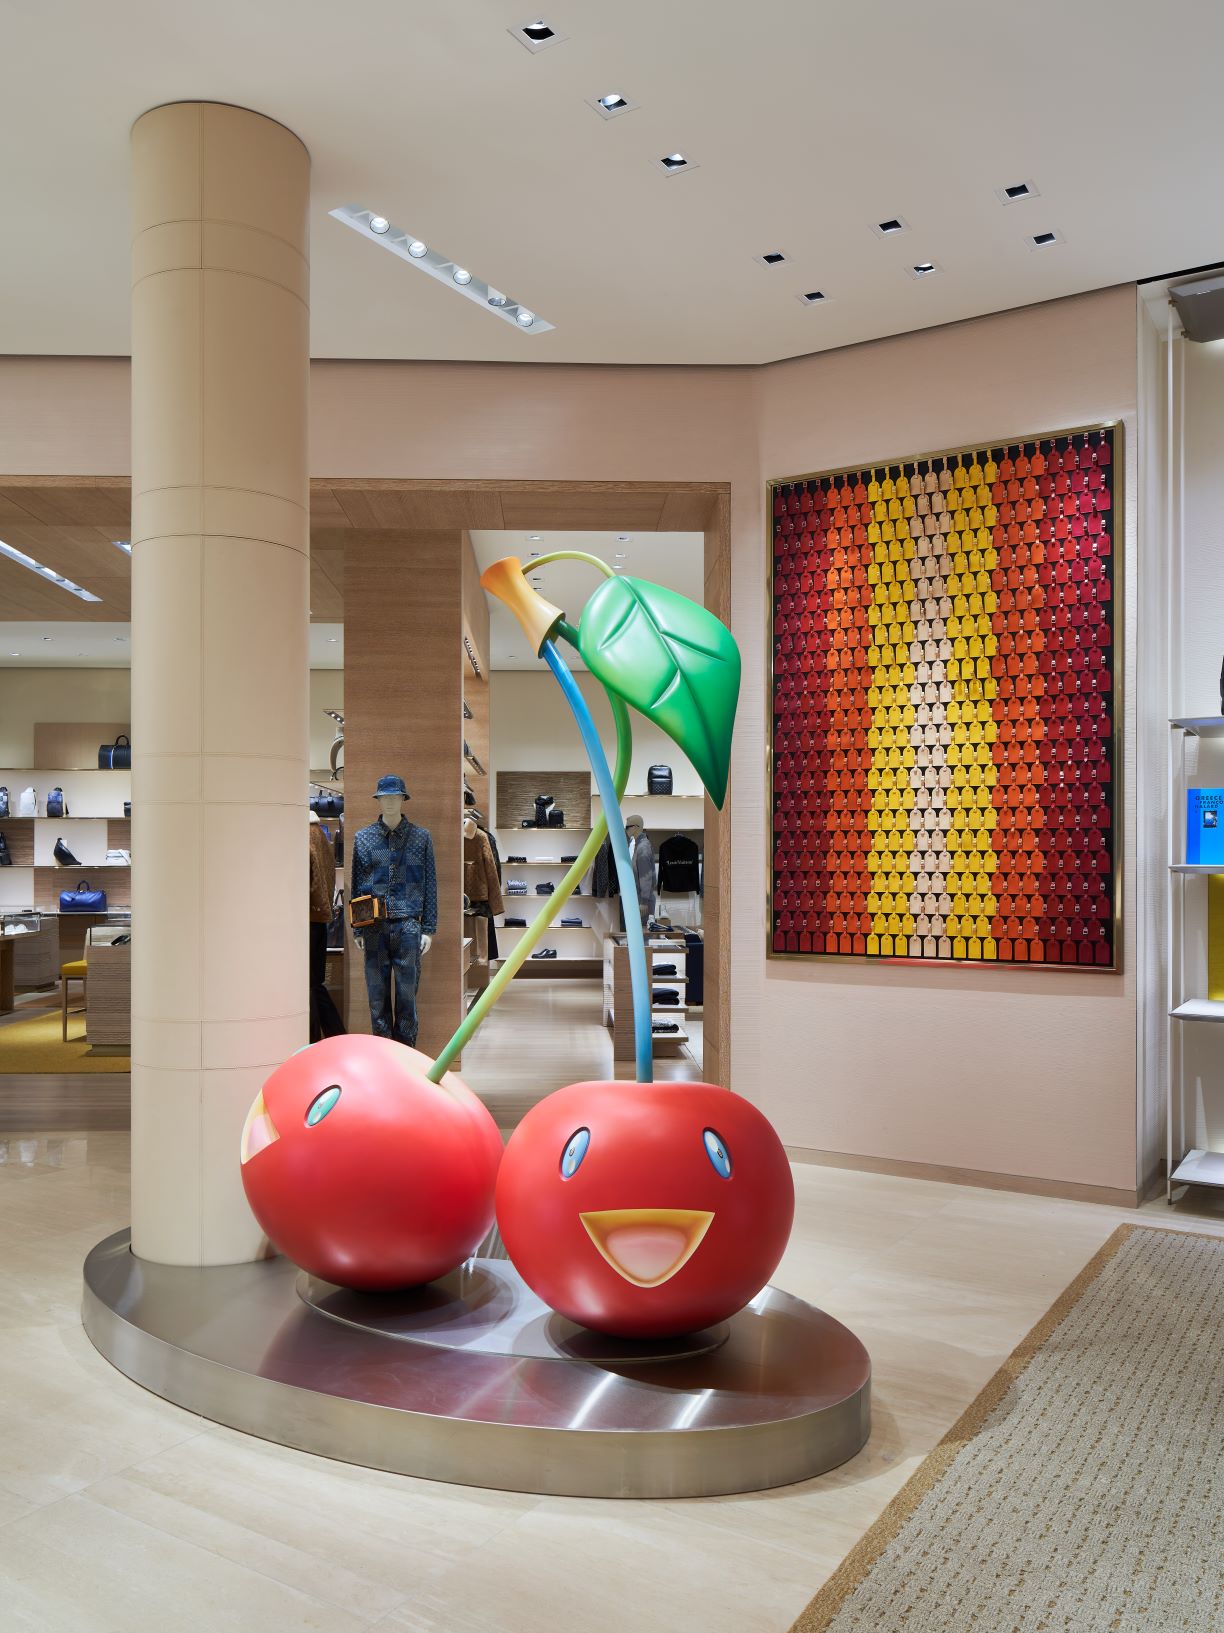 Louis Vuitton Yorkdale Mall Store Opens Just in Time for Fall Shopping